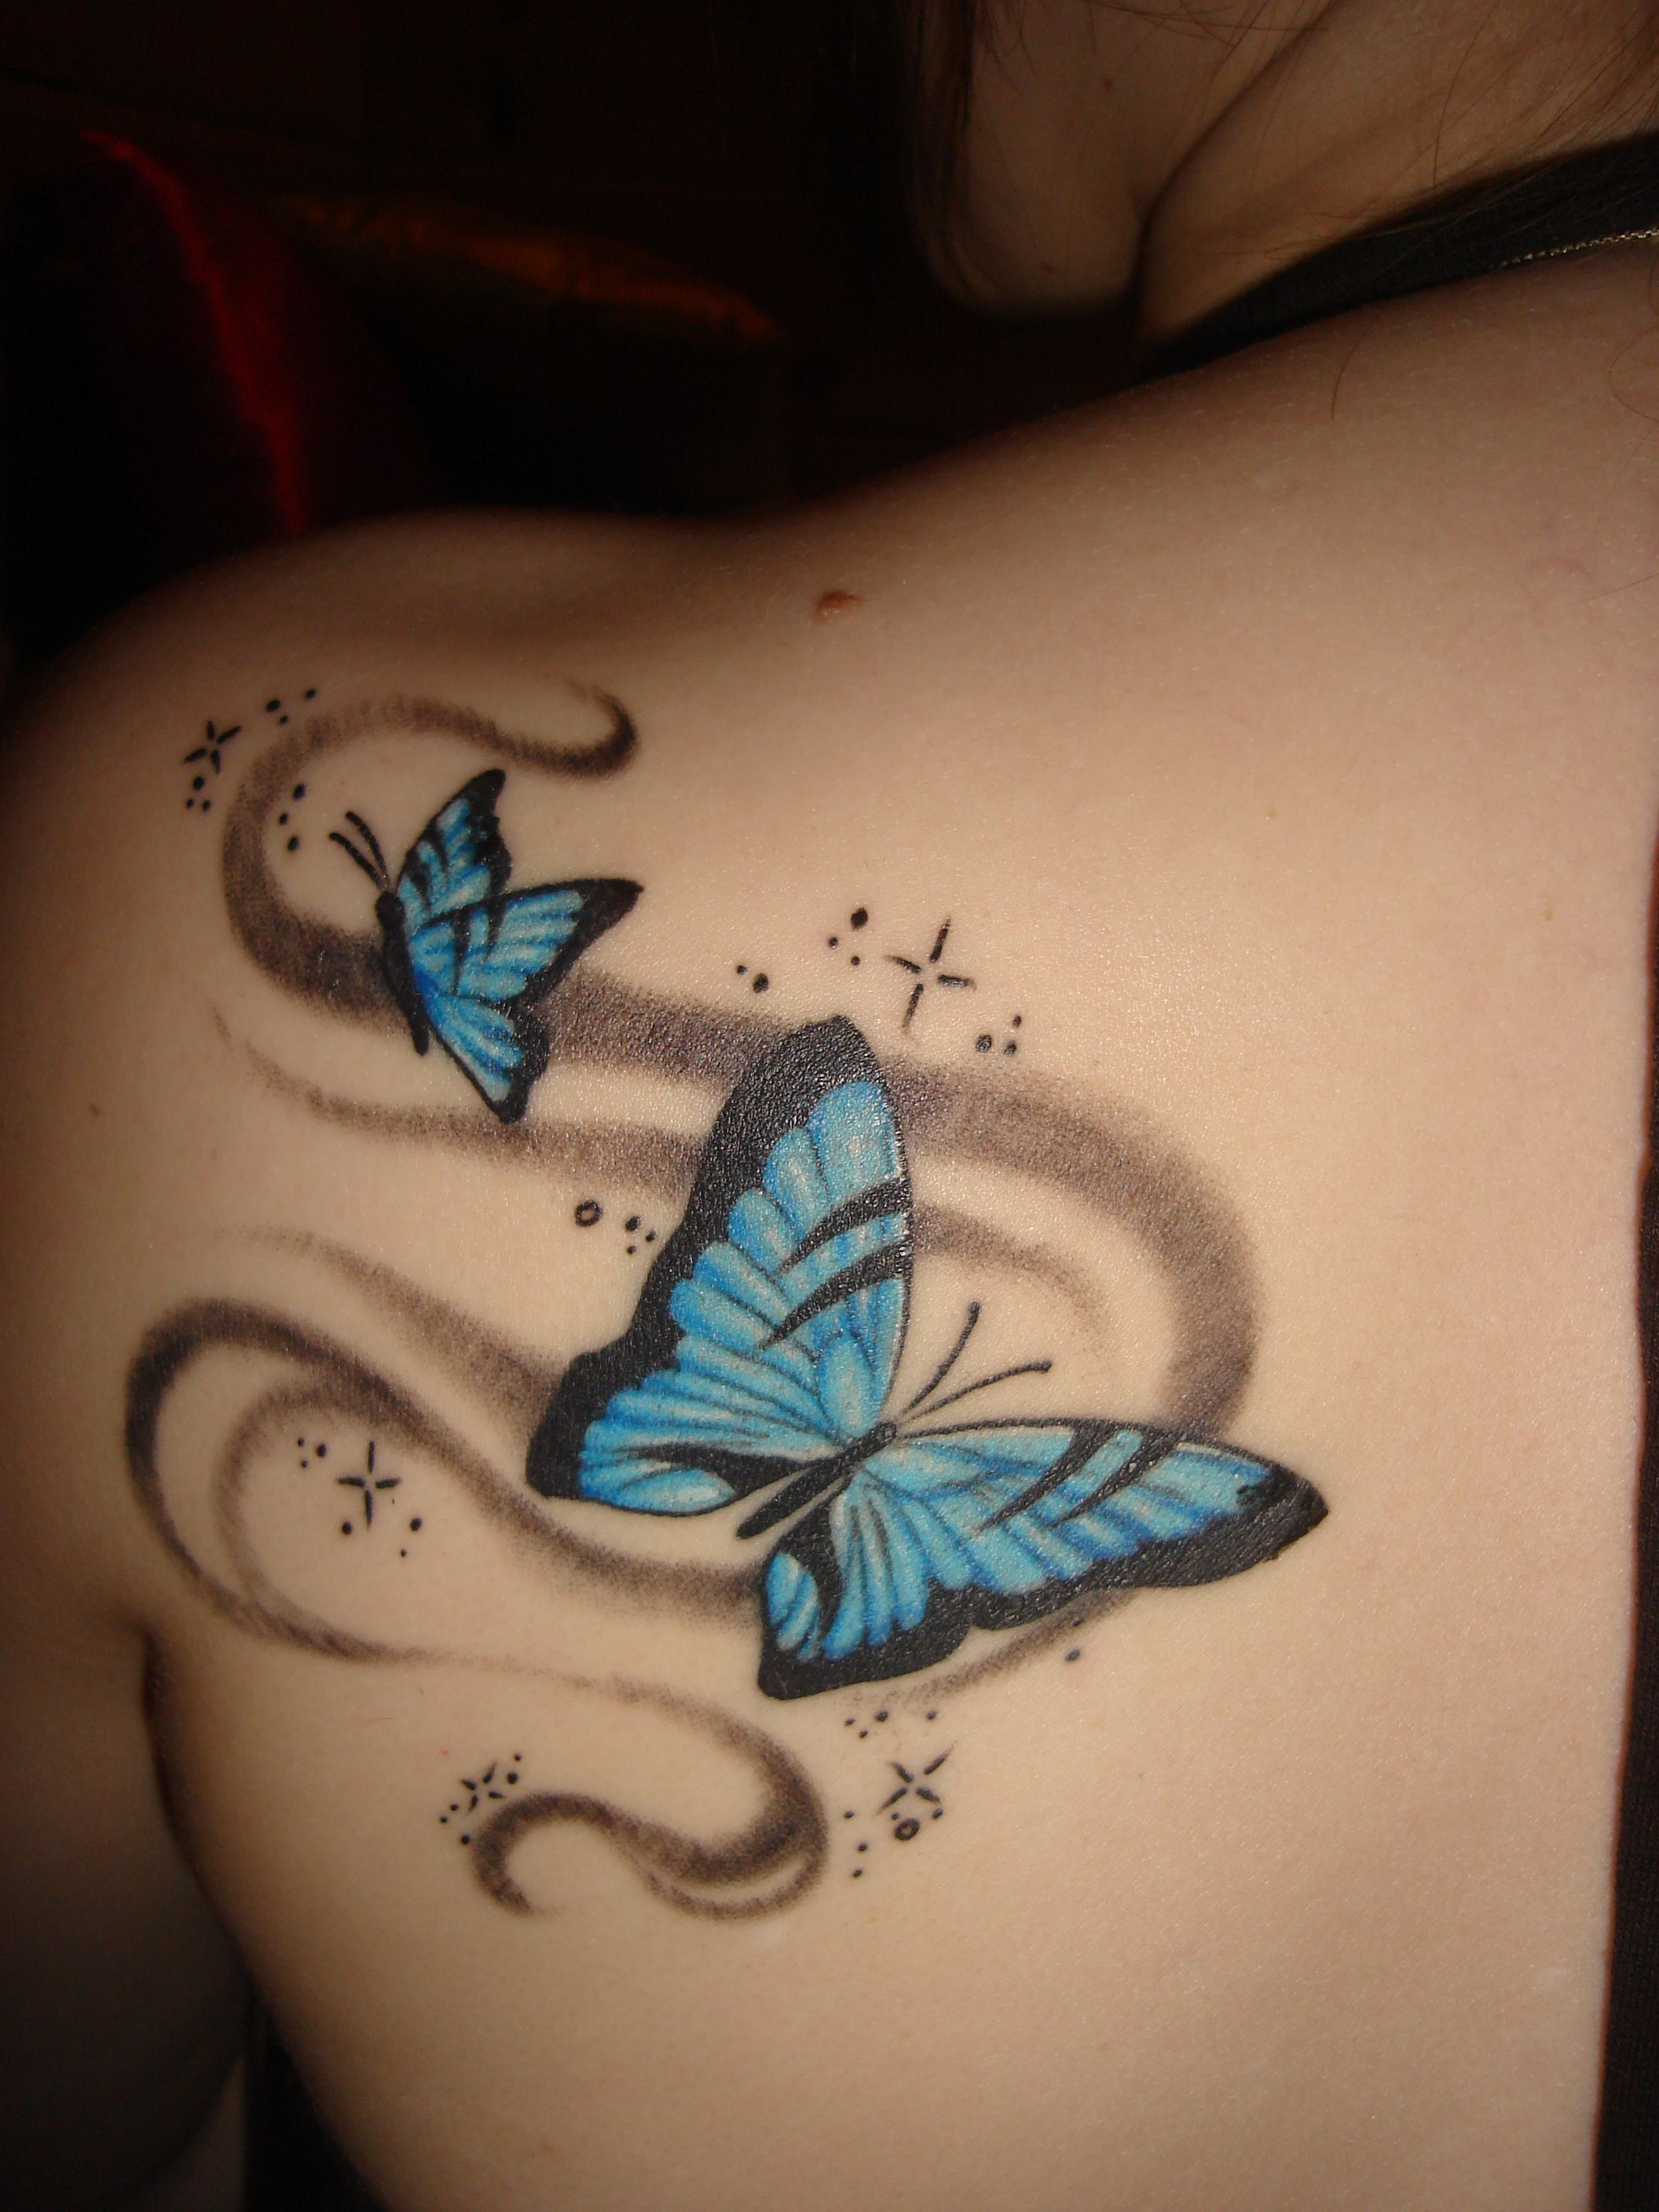 Butterfly Tattoo Meanings And Design Ideas Tattoos And Piercings with dimensions 2112 X 2816